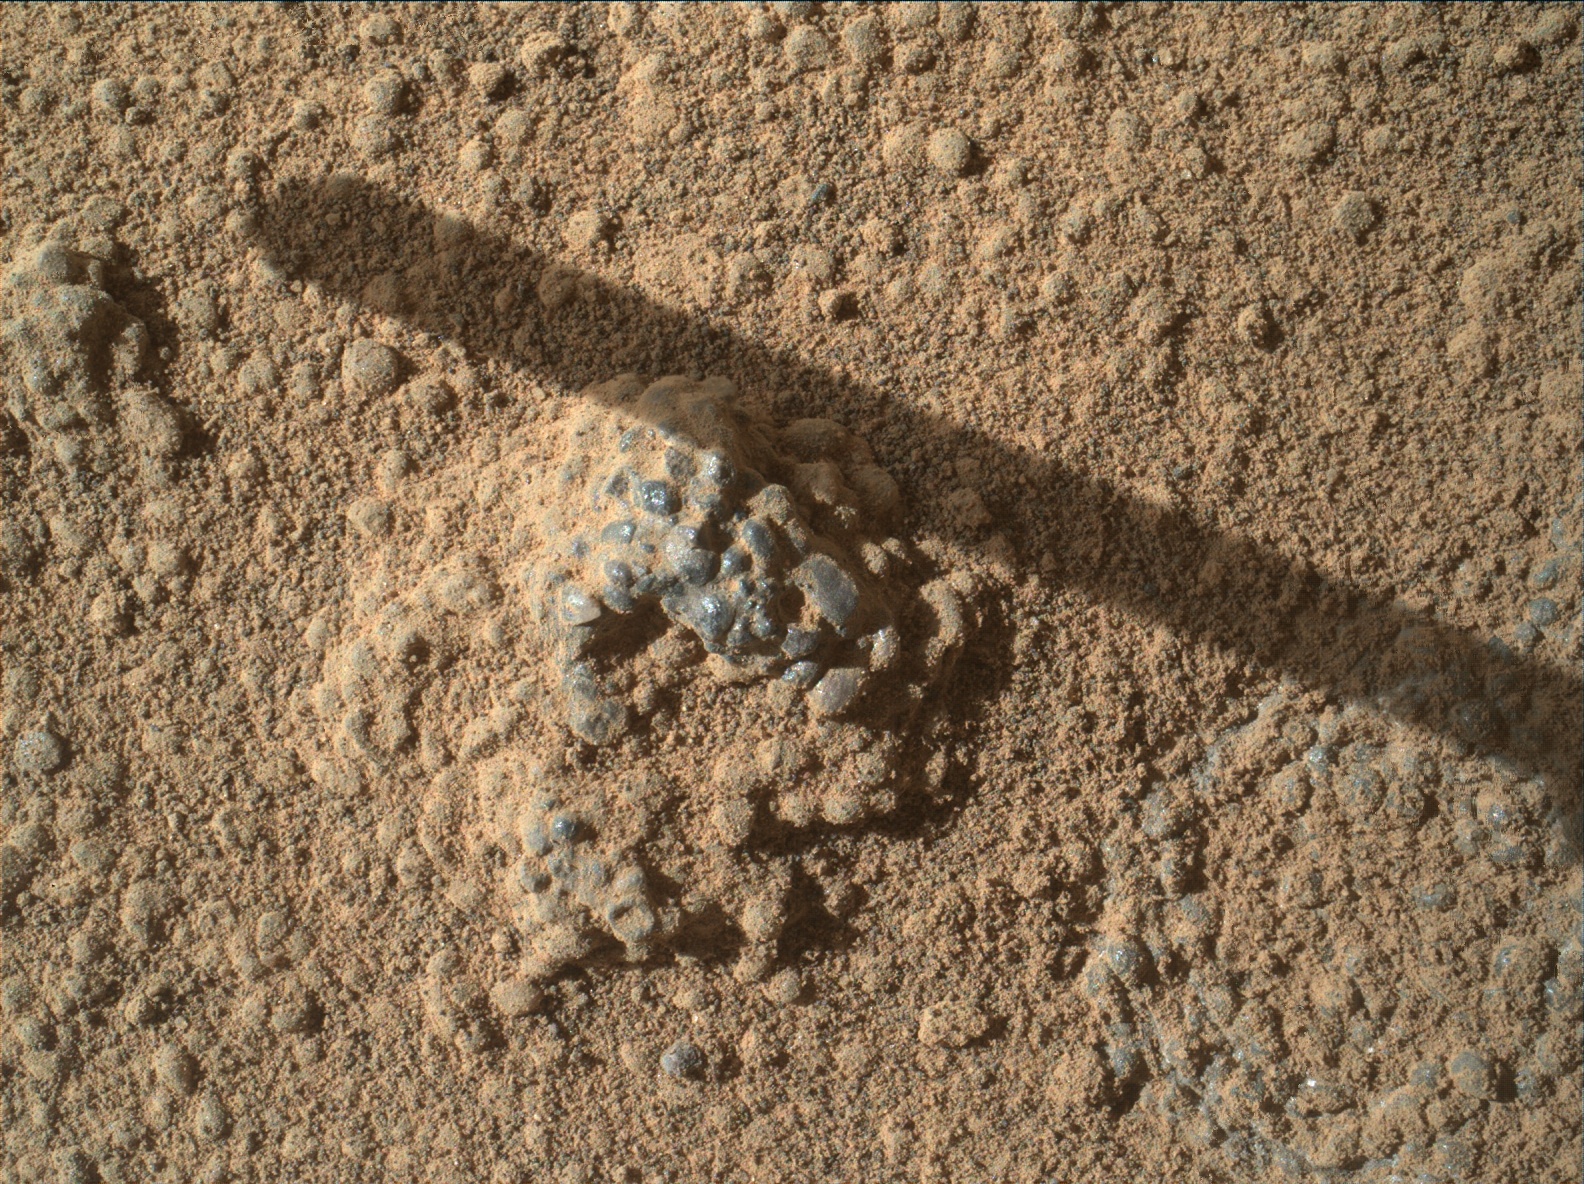 Nasa's Mars rover Curiosity acquired this image using its Mars Hand Lens Imager (MAHLI) on Sol 1280